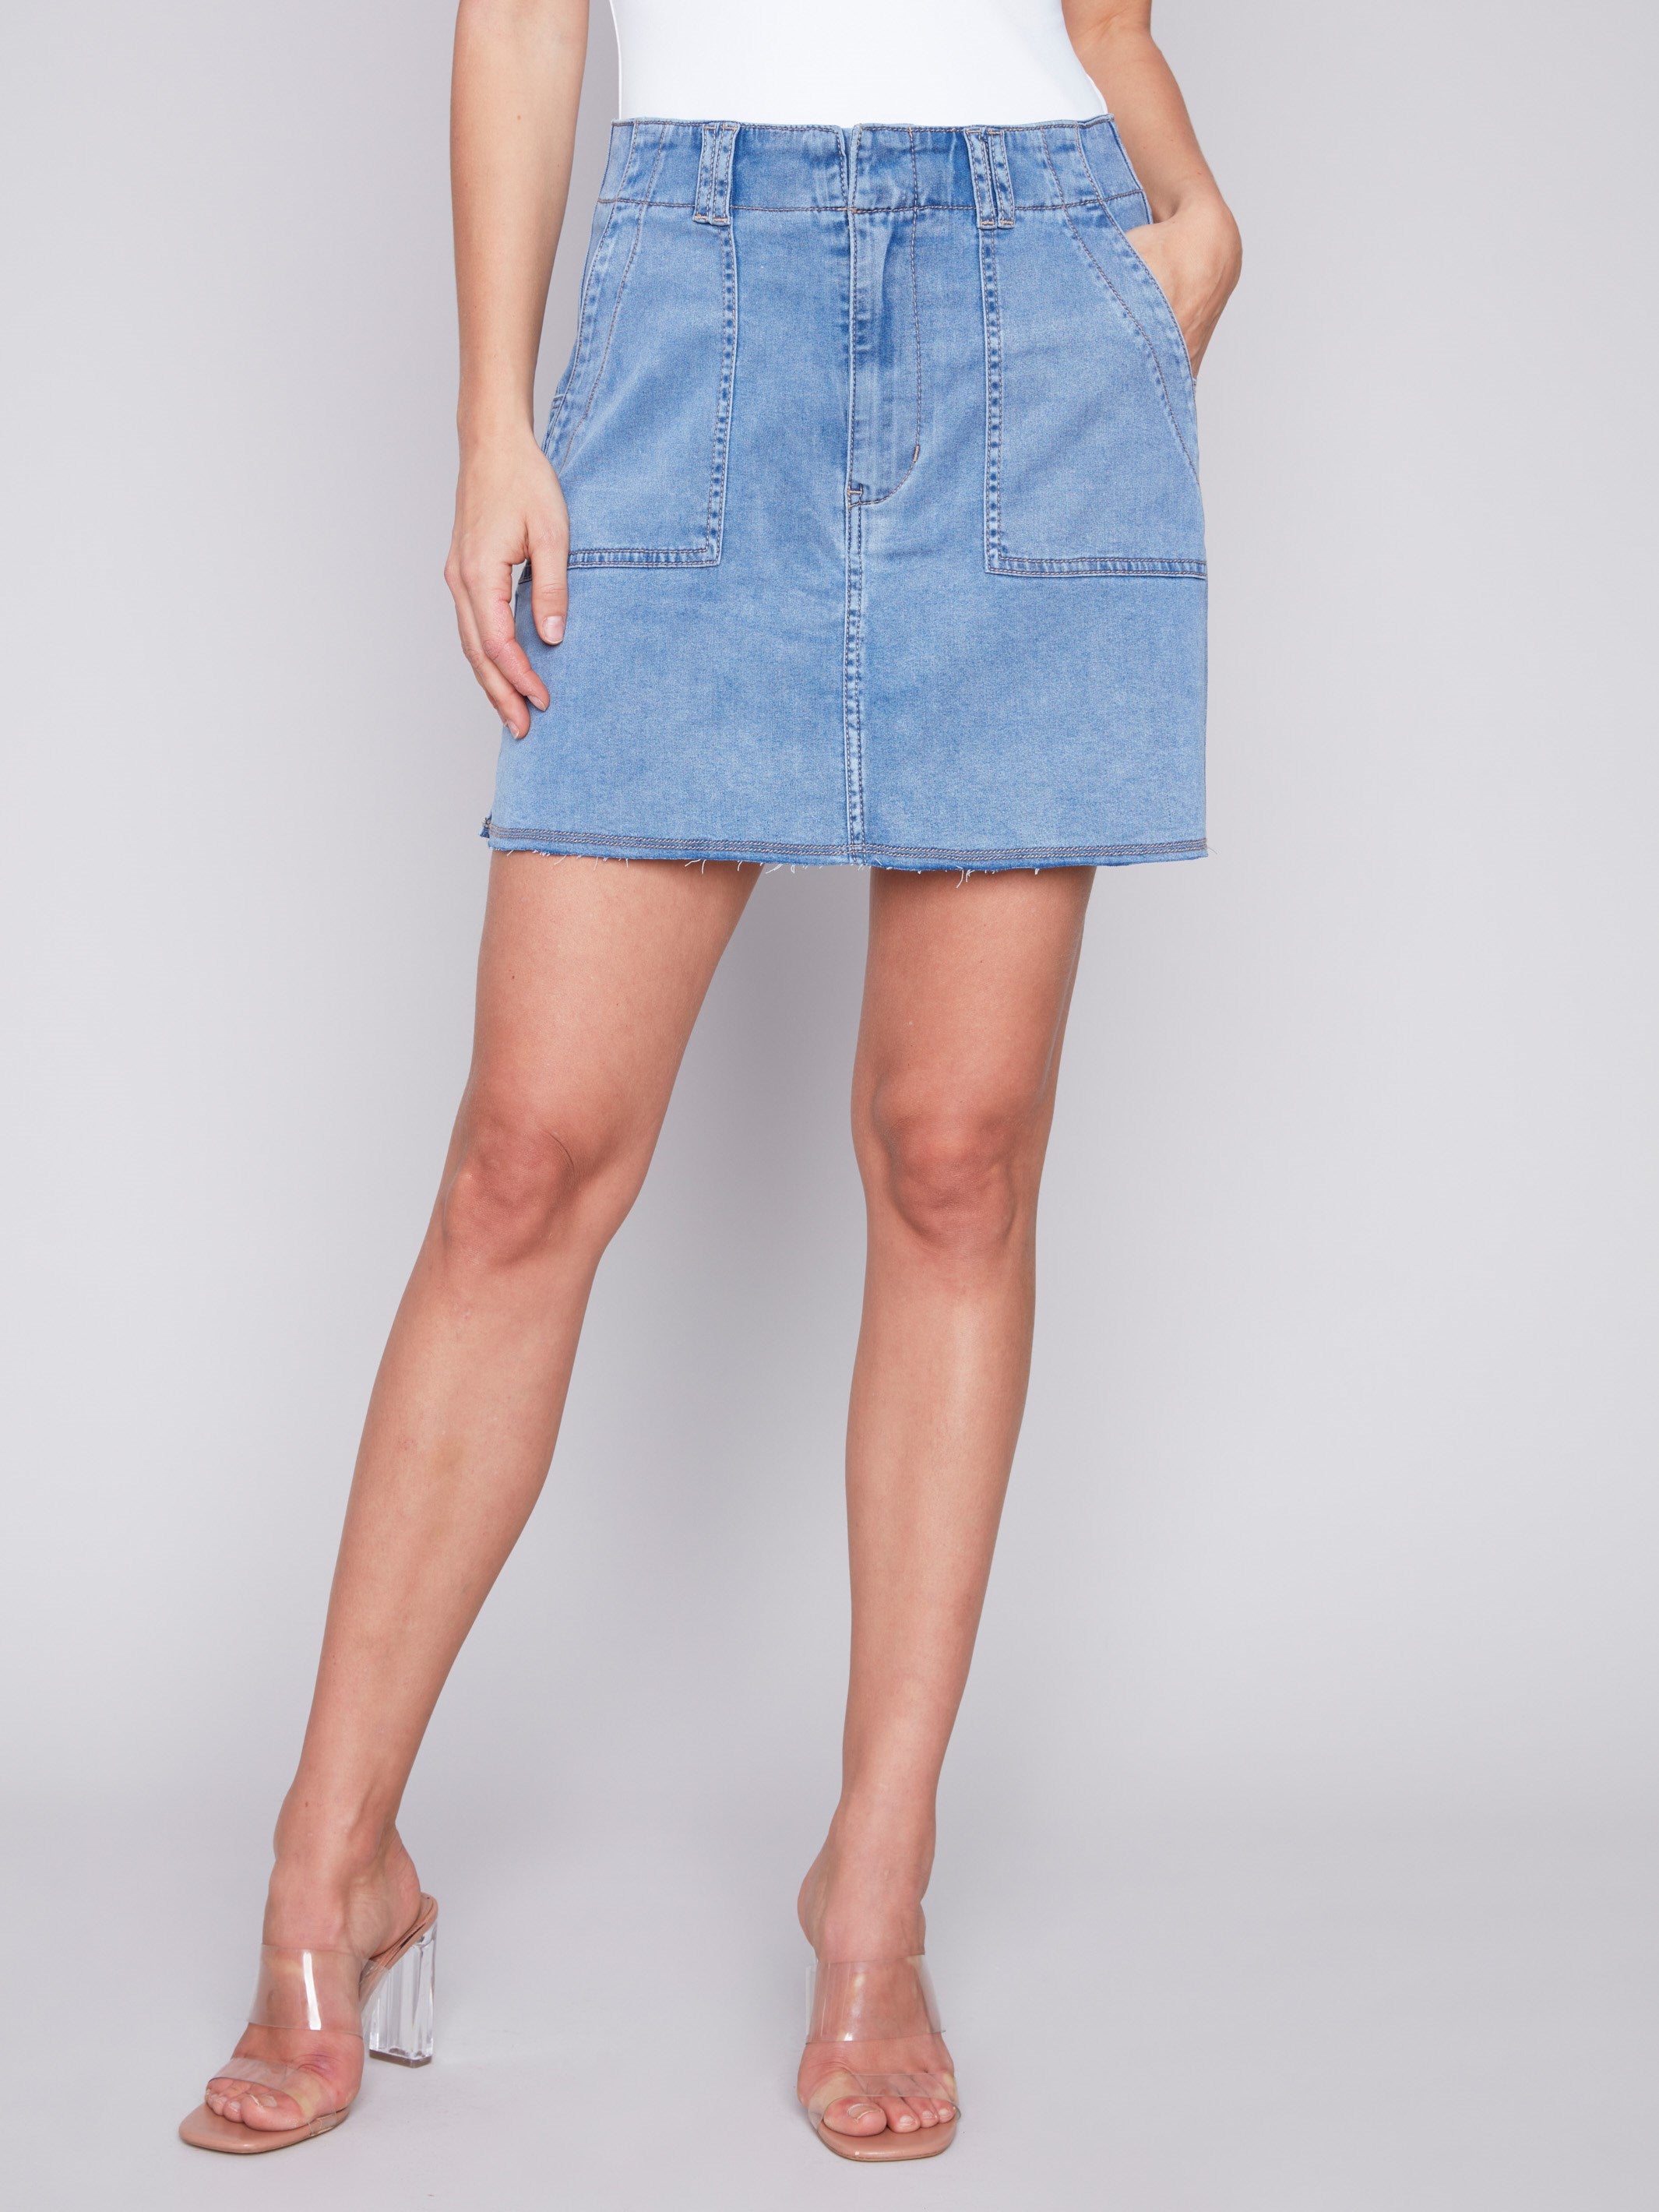 Canvas Cargo Skort - Chambray - Charlie B Collection Canada - Image 4